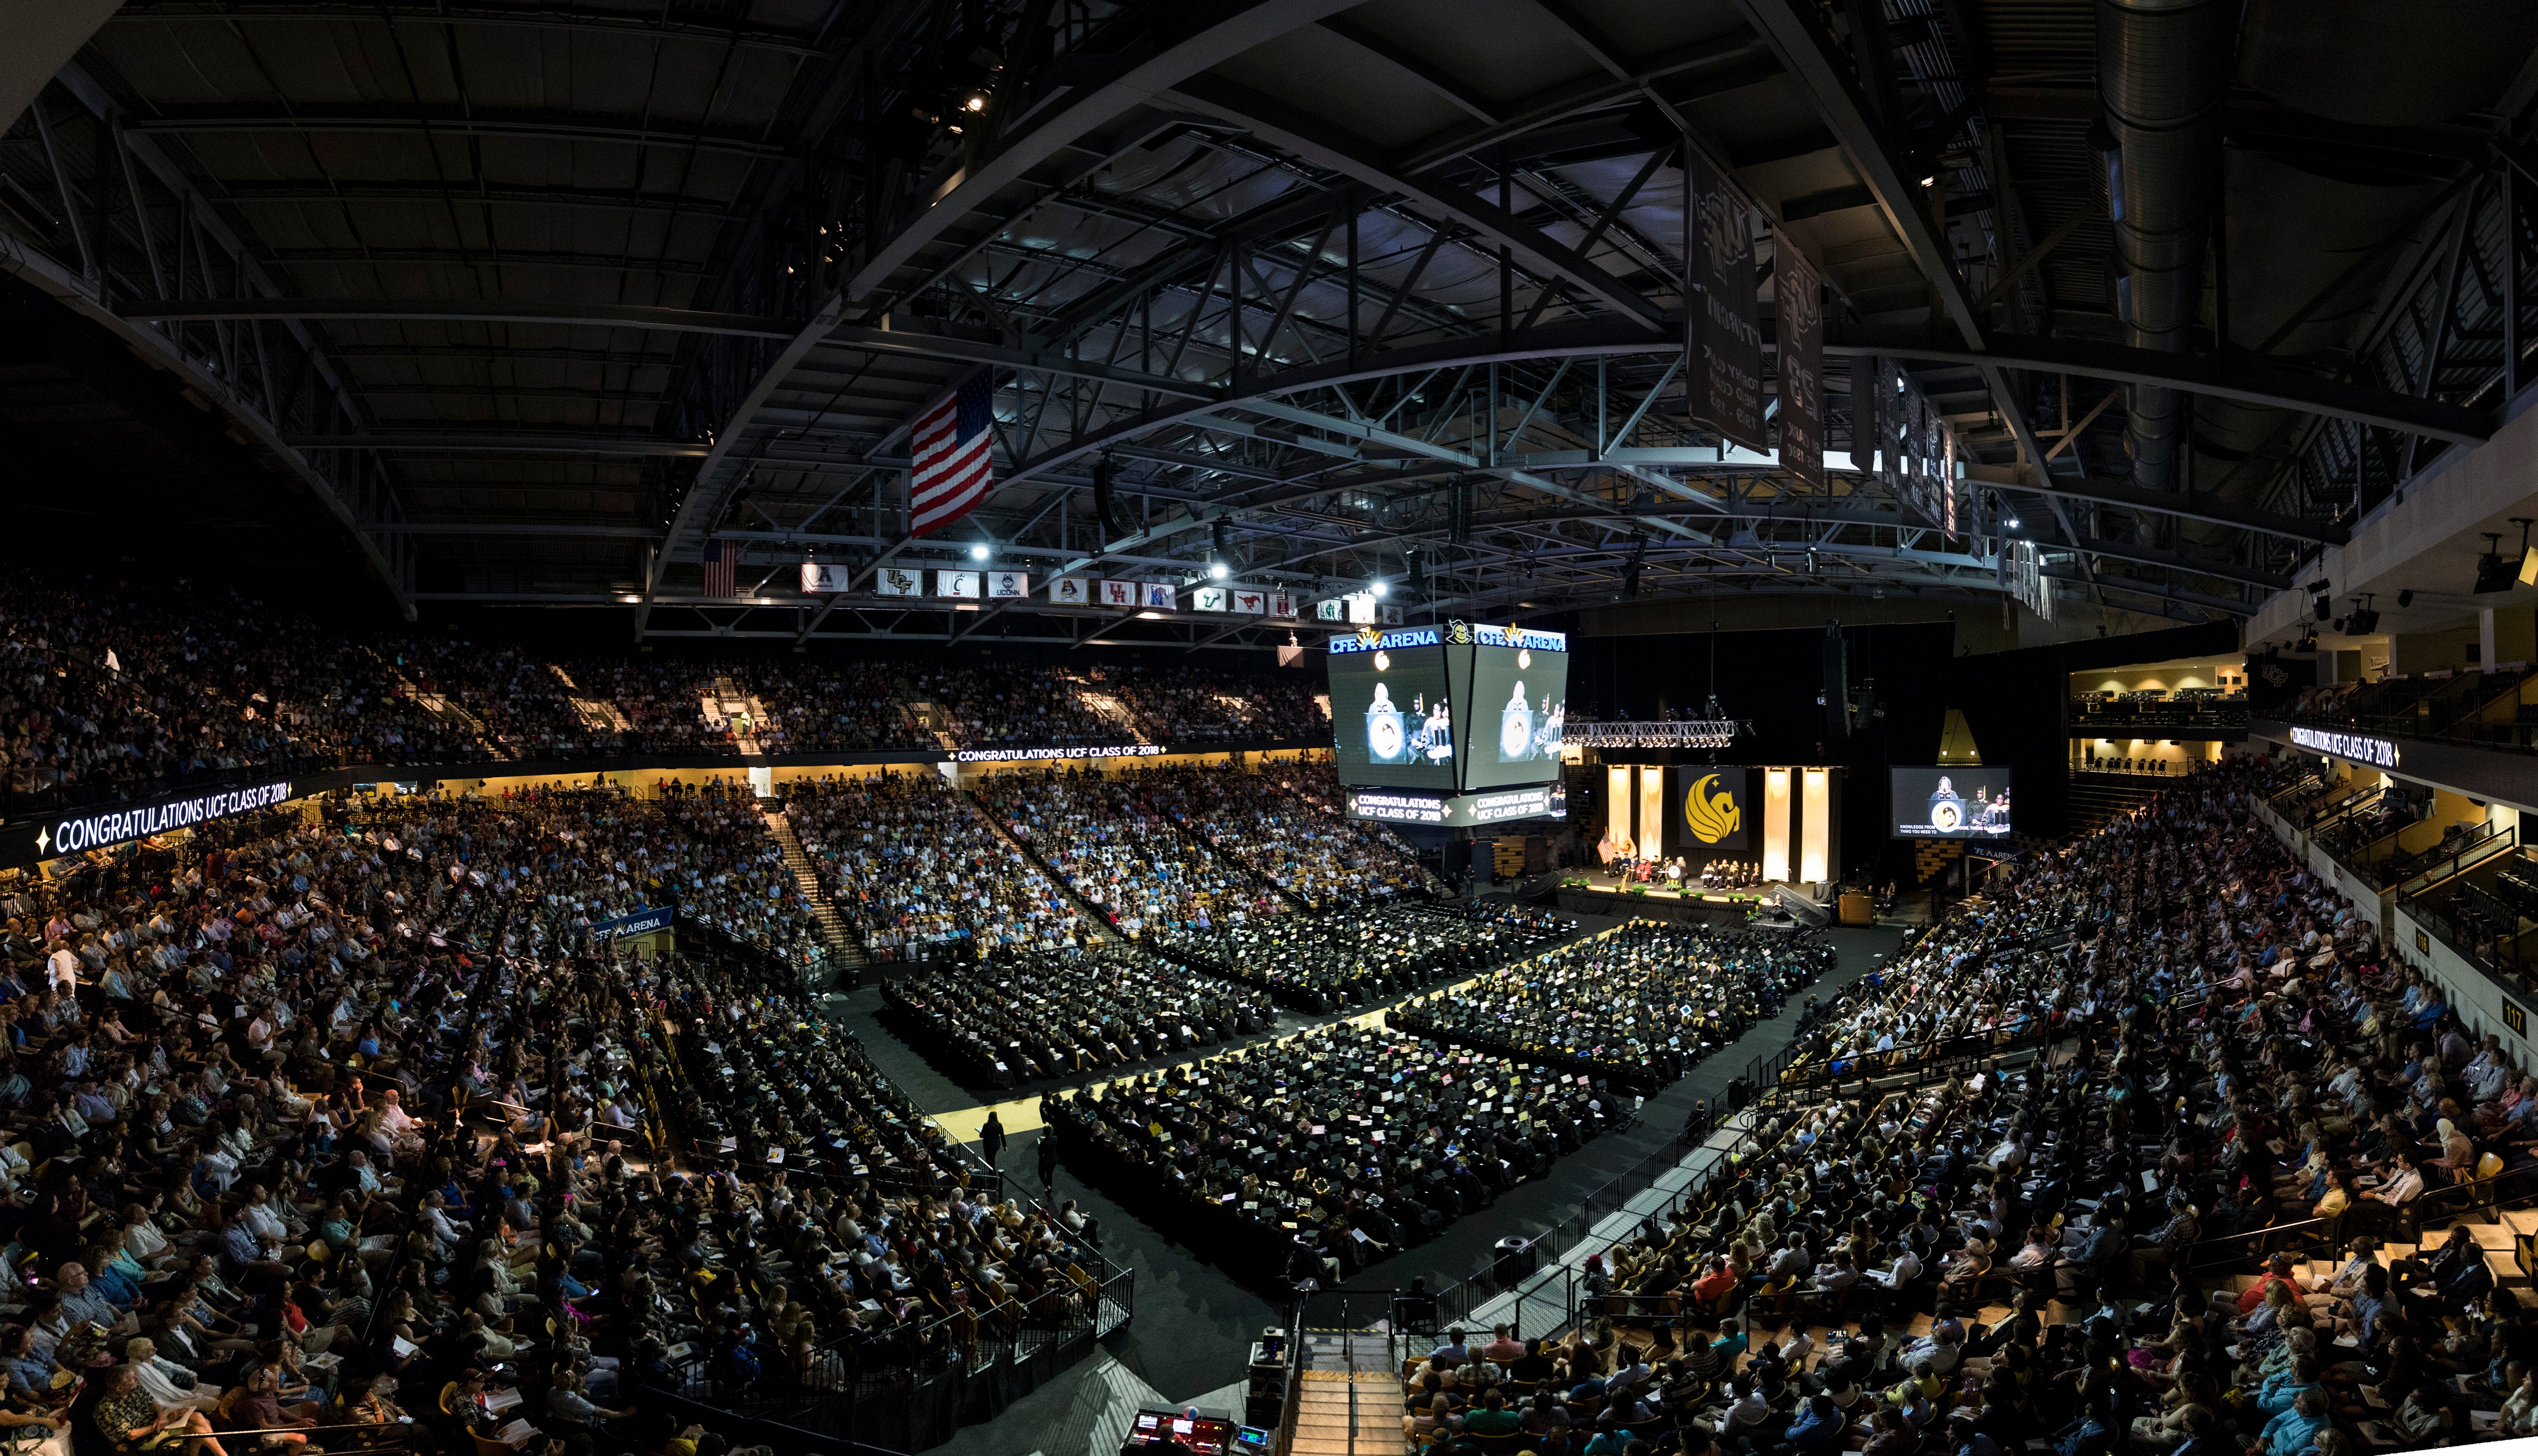 A wide shot displays the crowded CFE Arena.